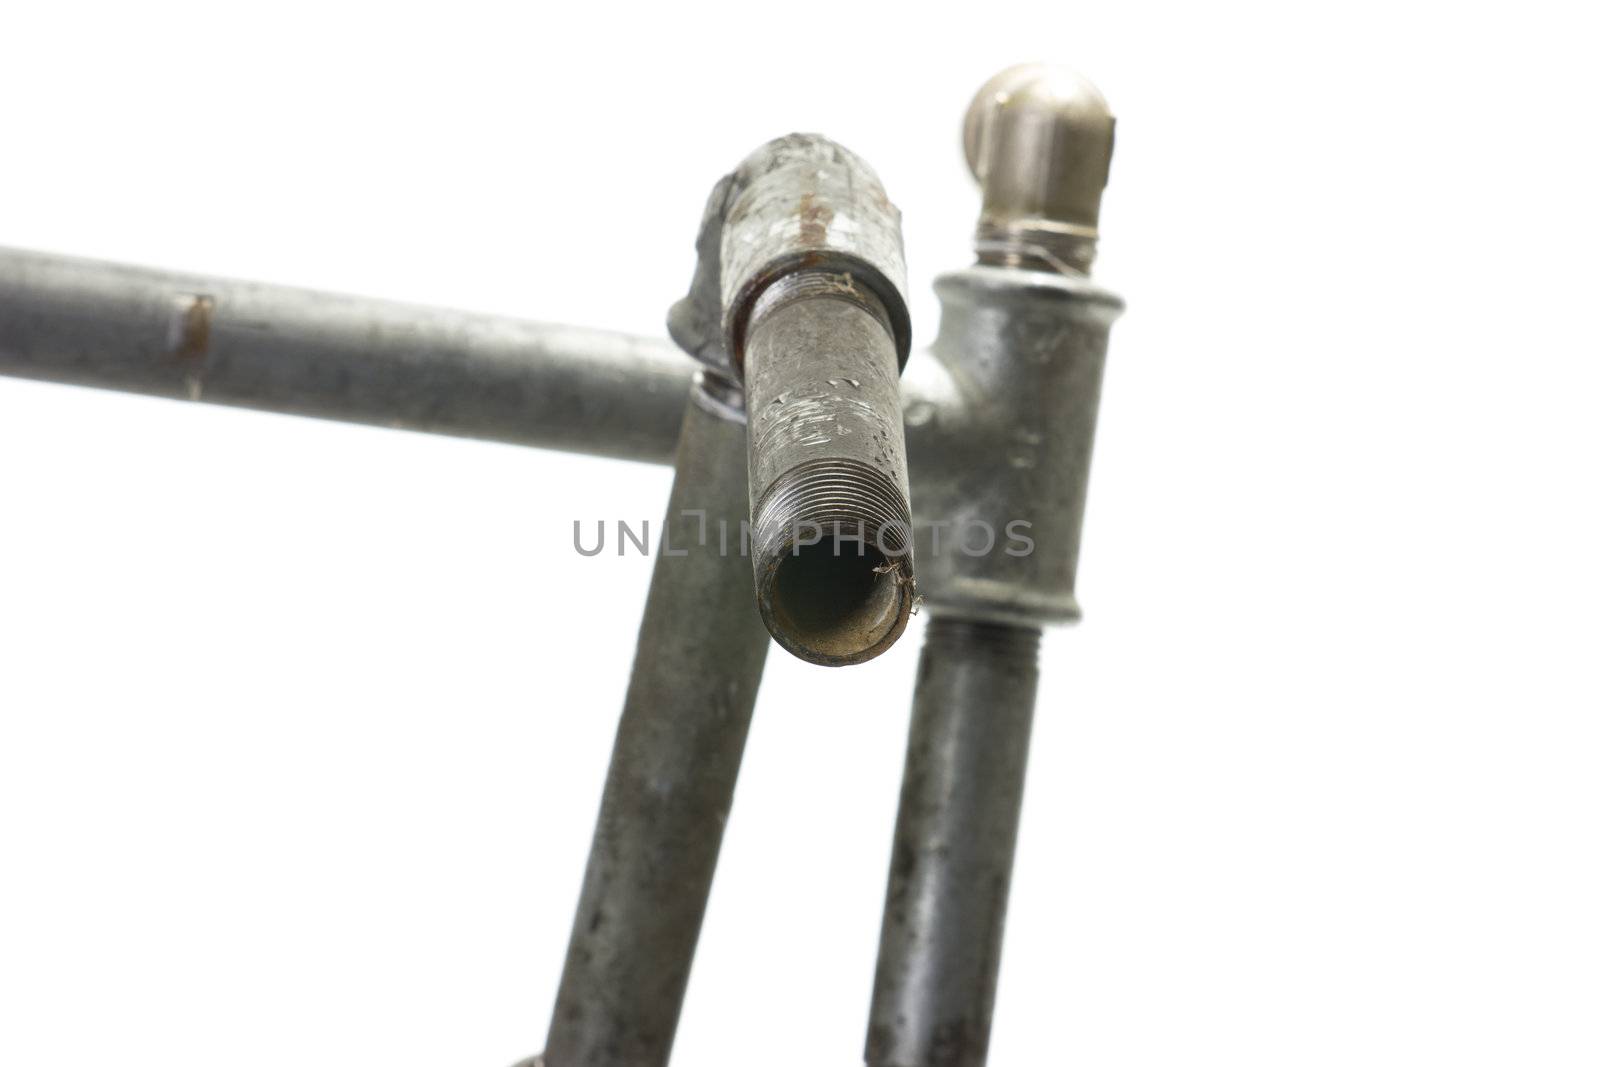 The construction of metal connectors and water pipes on a white background